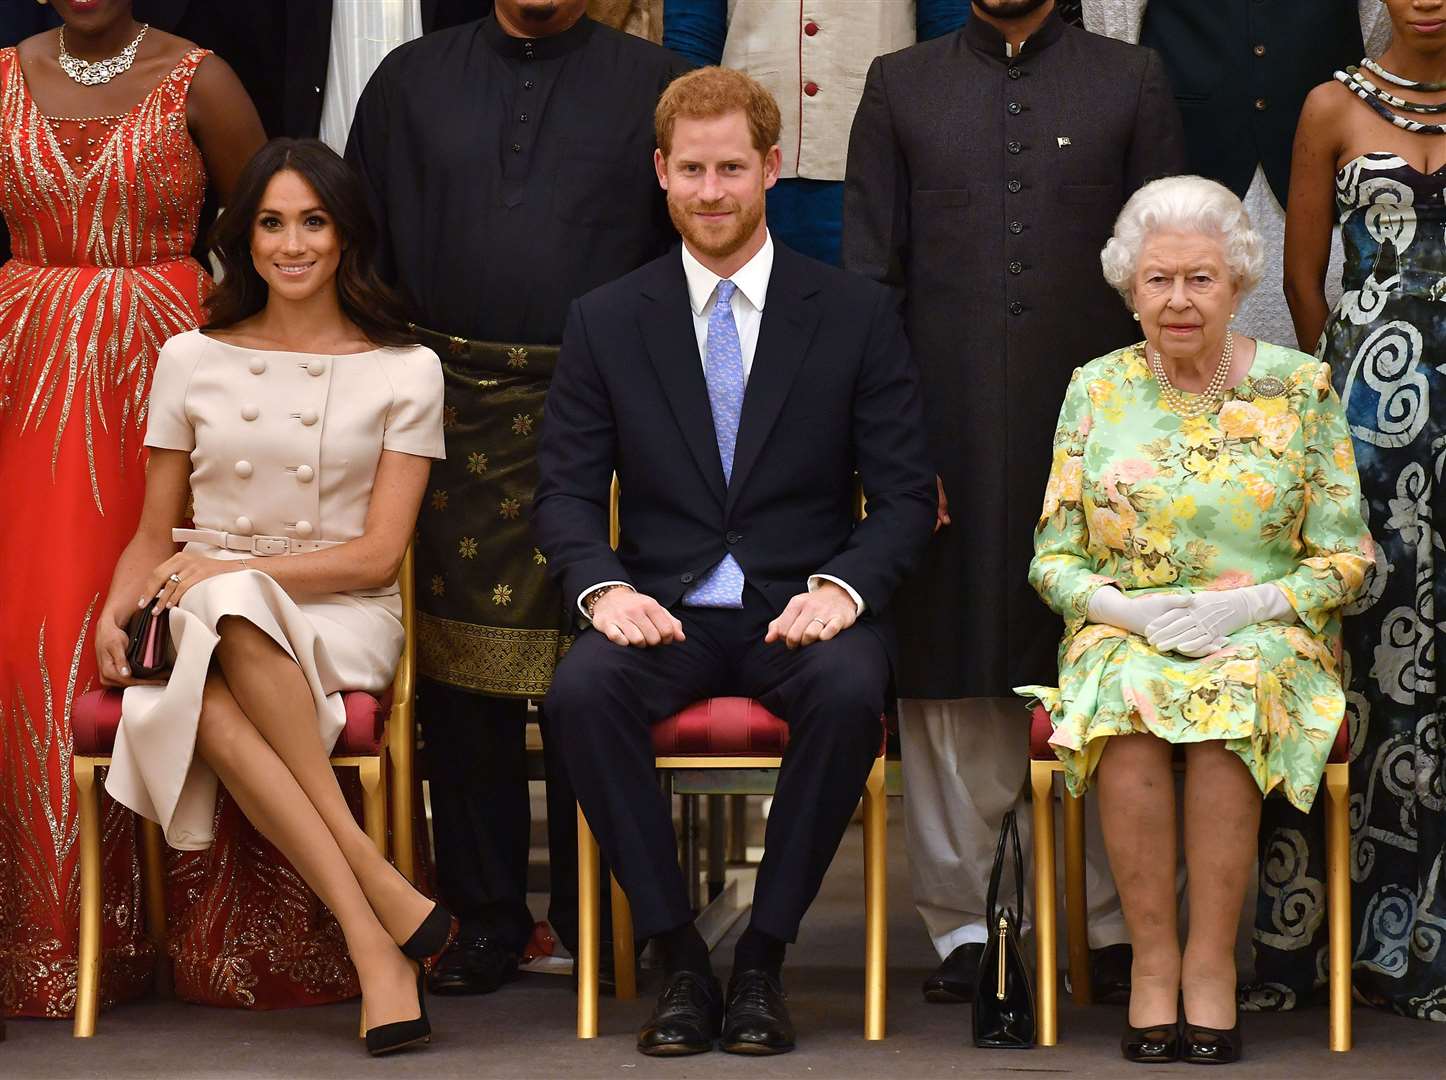 The Sussexes with the Queen in 2018 (John Stillwell/PA)